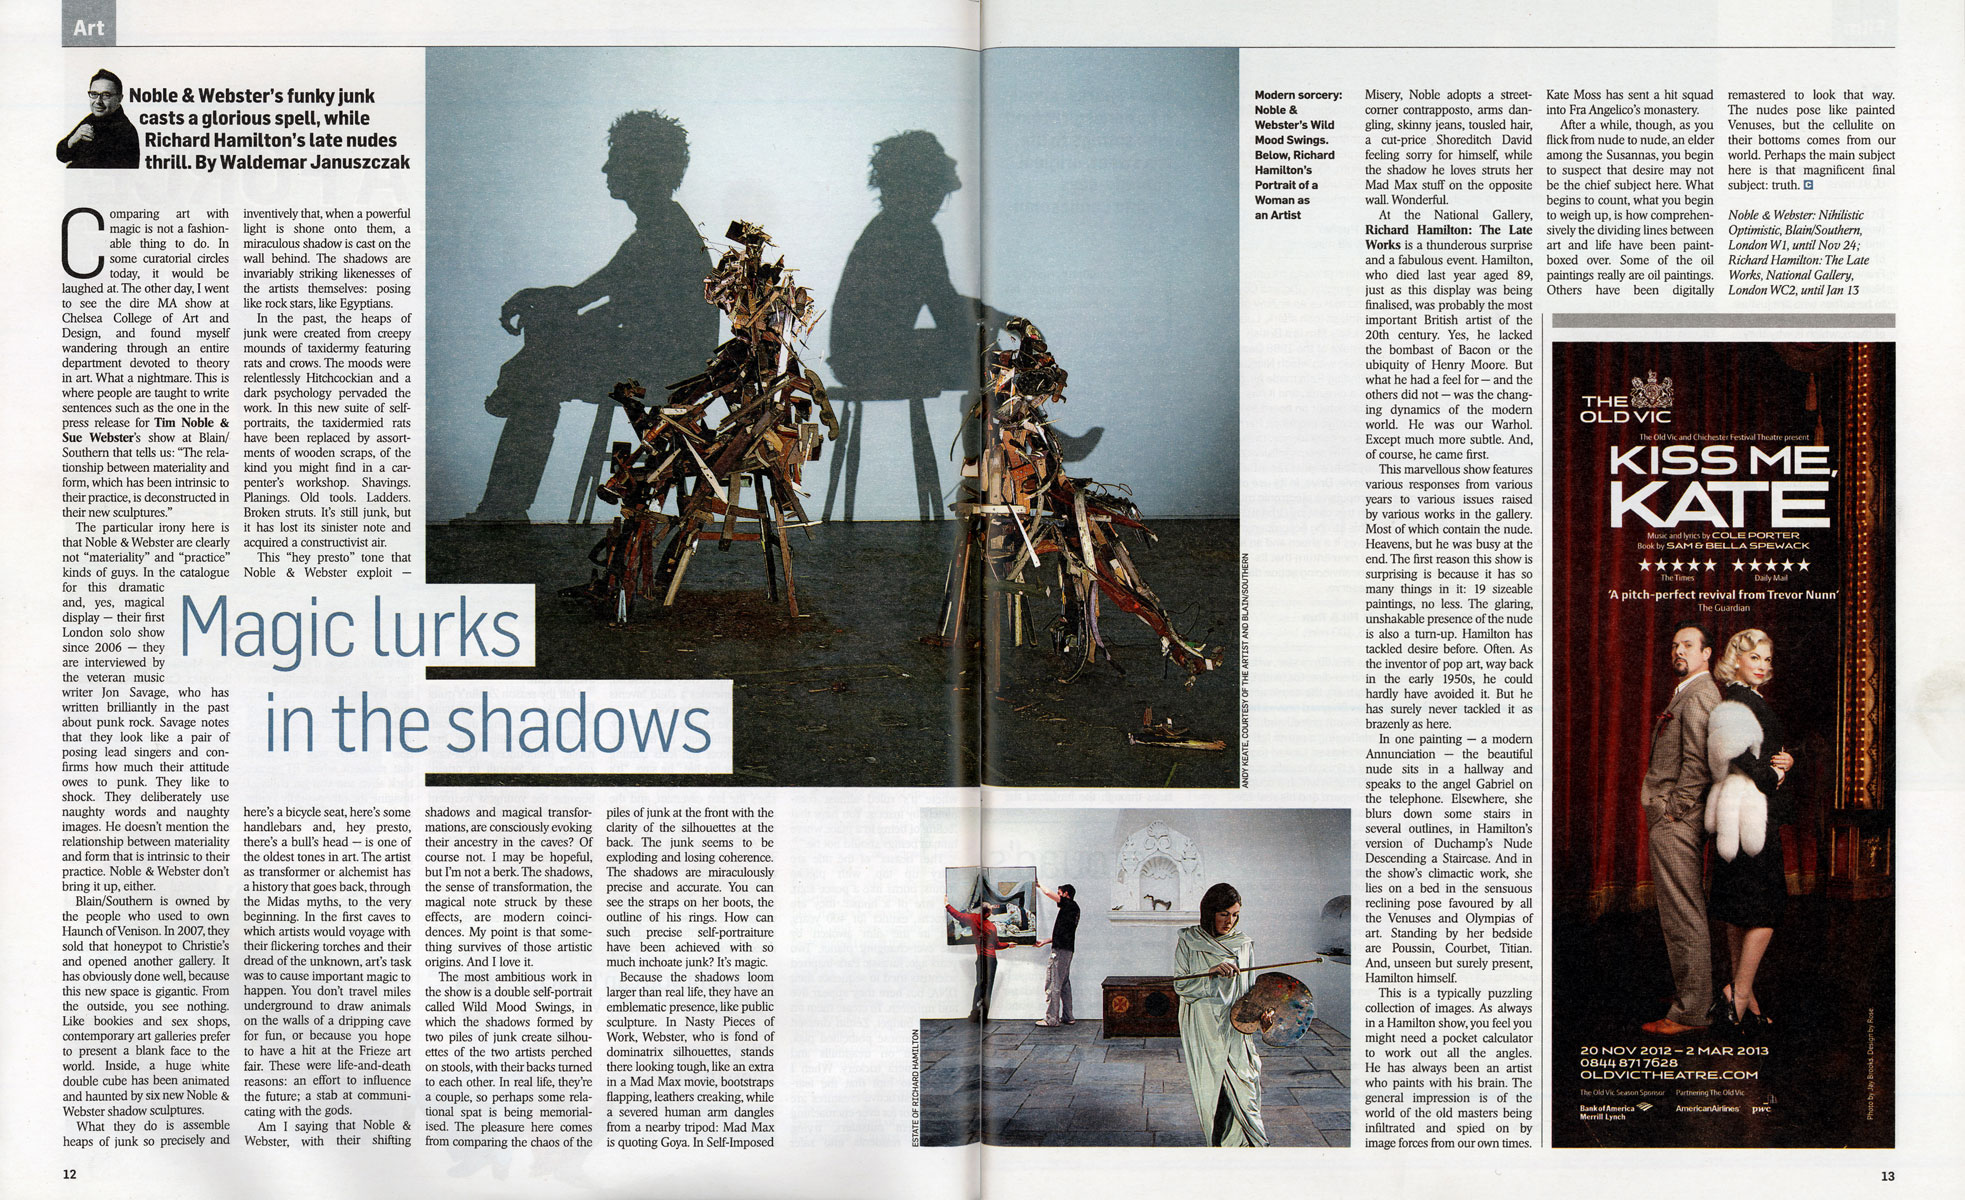 Sunday Times Culture Mag, Oct 2012 pgs 12-13